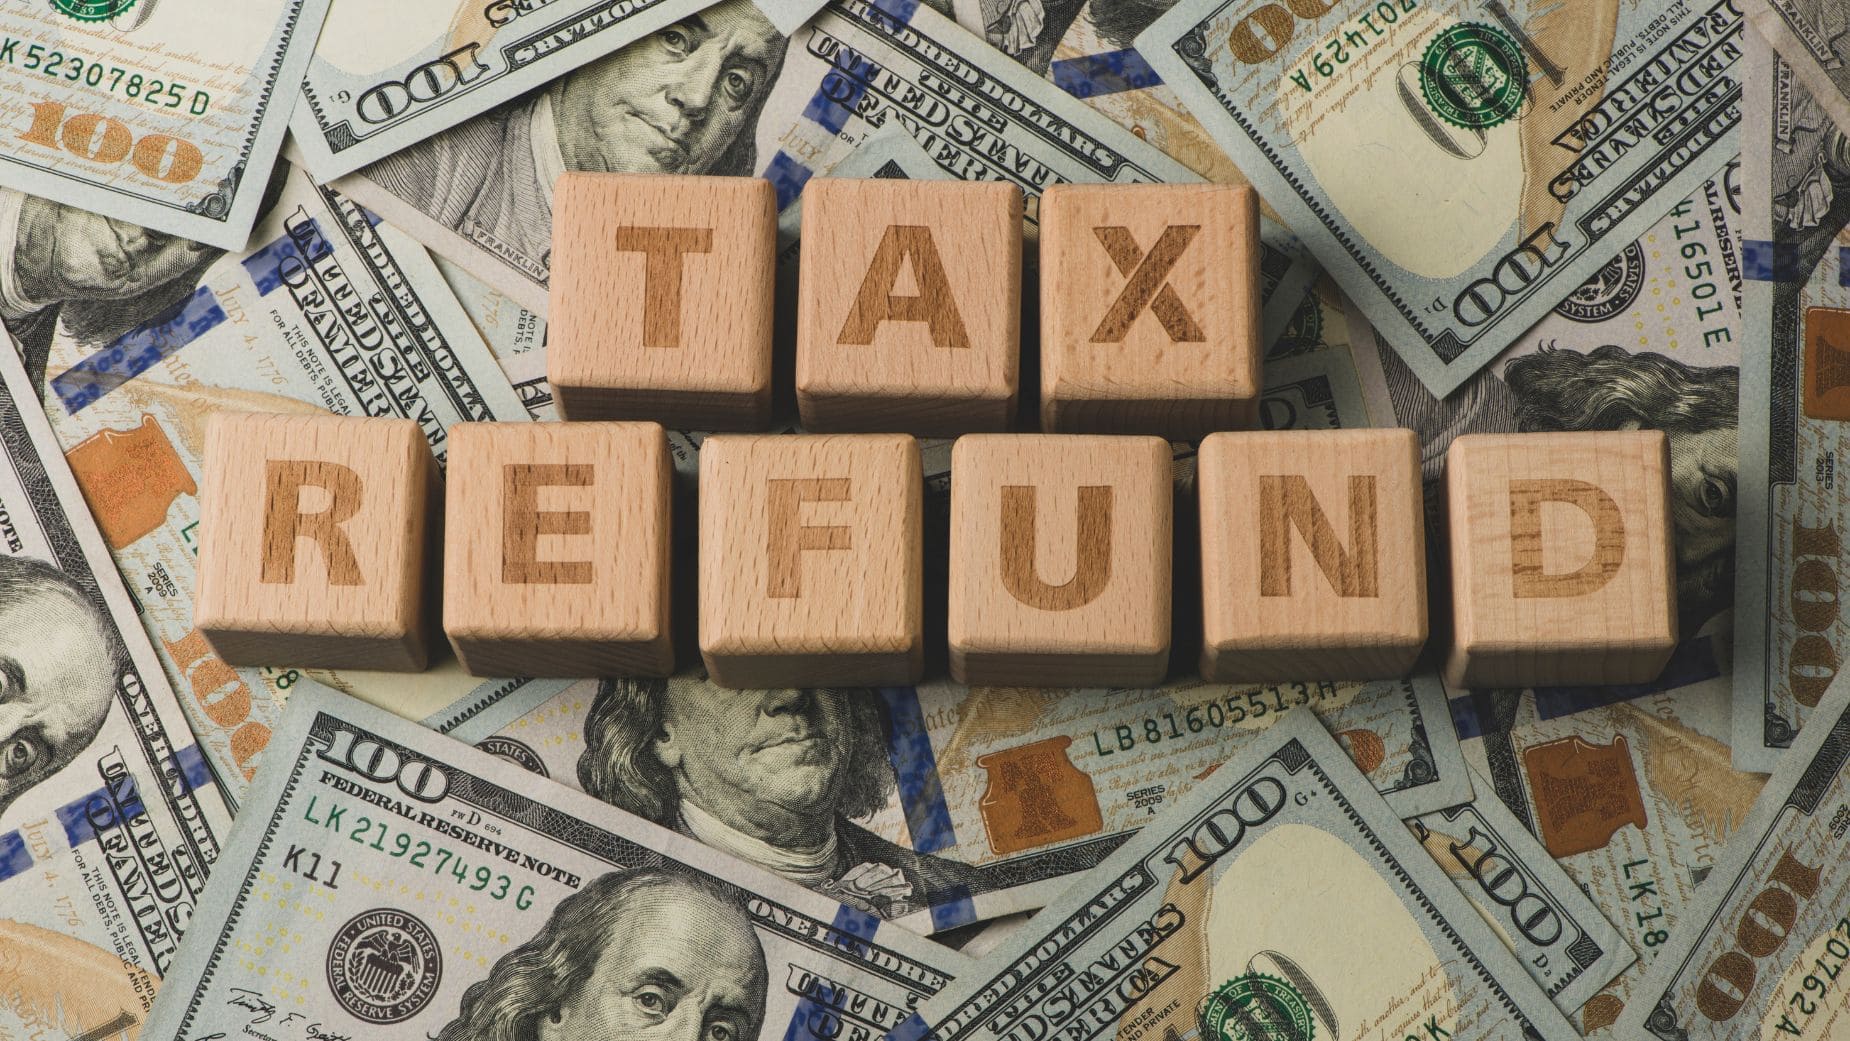 Getting a Tax Refund from IRS earlier is possible